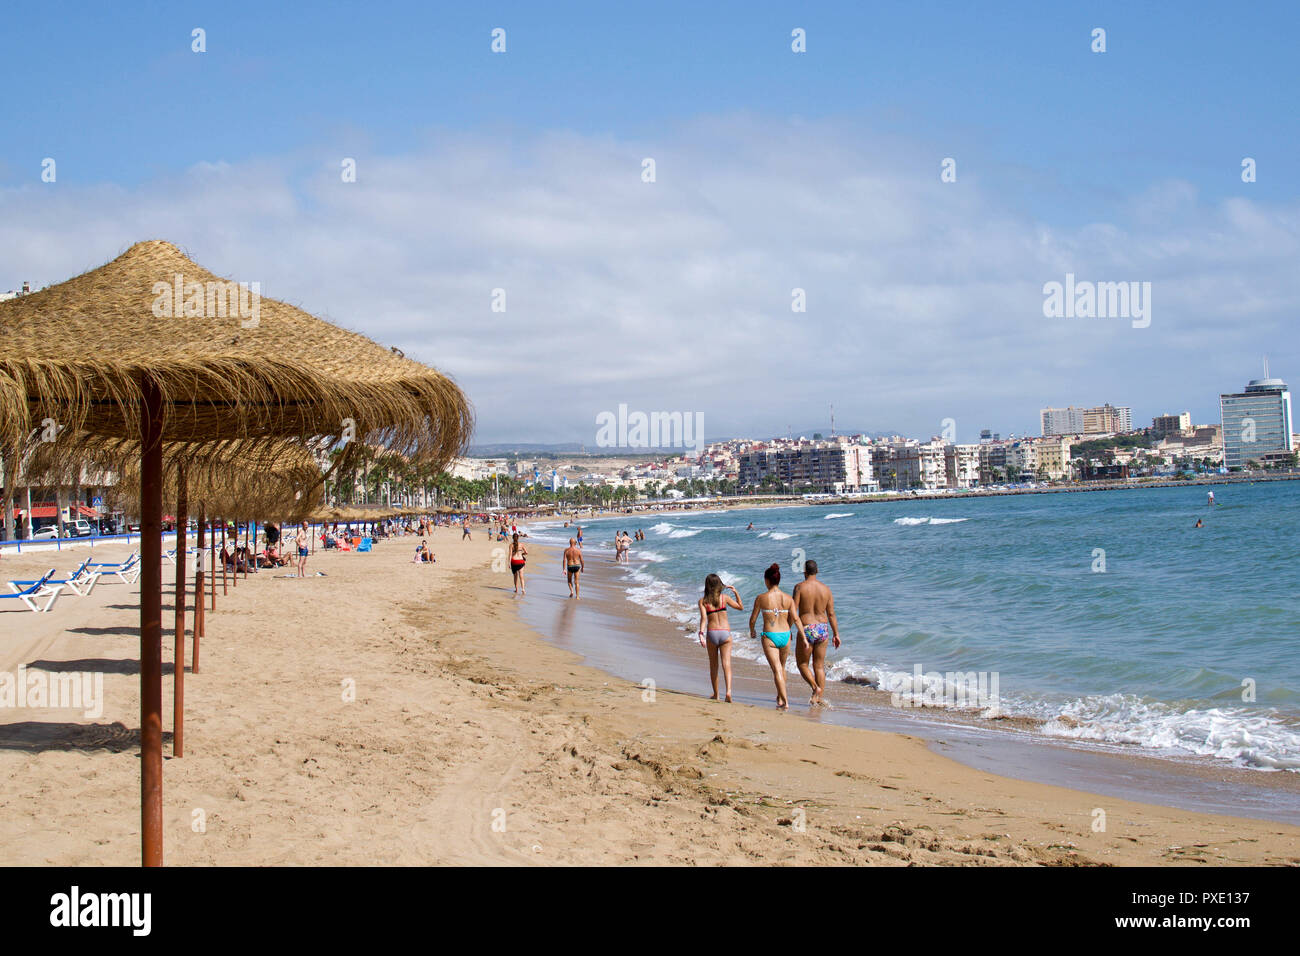 Melilla, Melilla, Spain. 18th Aug, 2018. People are seen walking along the sandy beach in Melilla.The Spanish enclave city of Melilla sits on the North African coast, surrounded on all sides by Morocco and the Mediterranean Sea. The city is surrounded by a 20-foot-tall metal fence to keep out migrants looking to come to Europe, but many migrants make it across anyway. The border is also a thriving economic hub where Moroccan labourers carry goods from Spain into Morocco. Credit: SOPA Images/ZUMA Wire/Alamy Live News Stock Photo